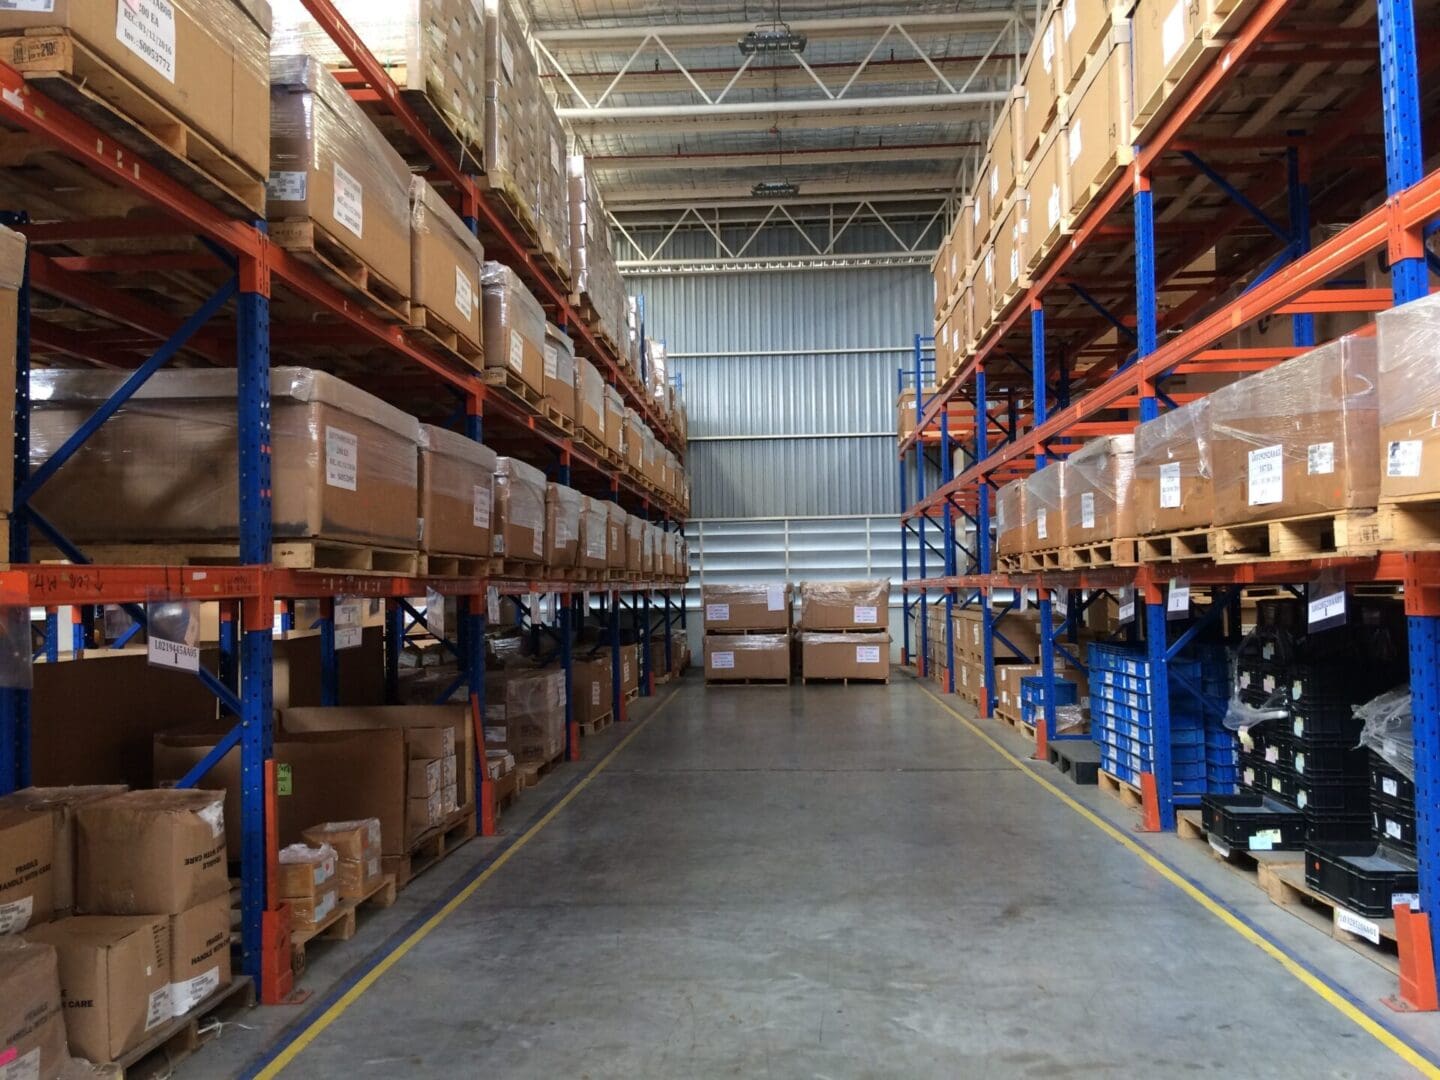 A warehouse filled with lots of shelves full of boxes.